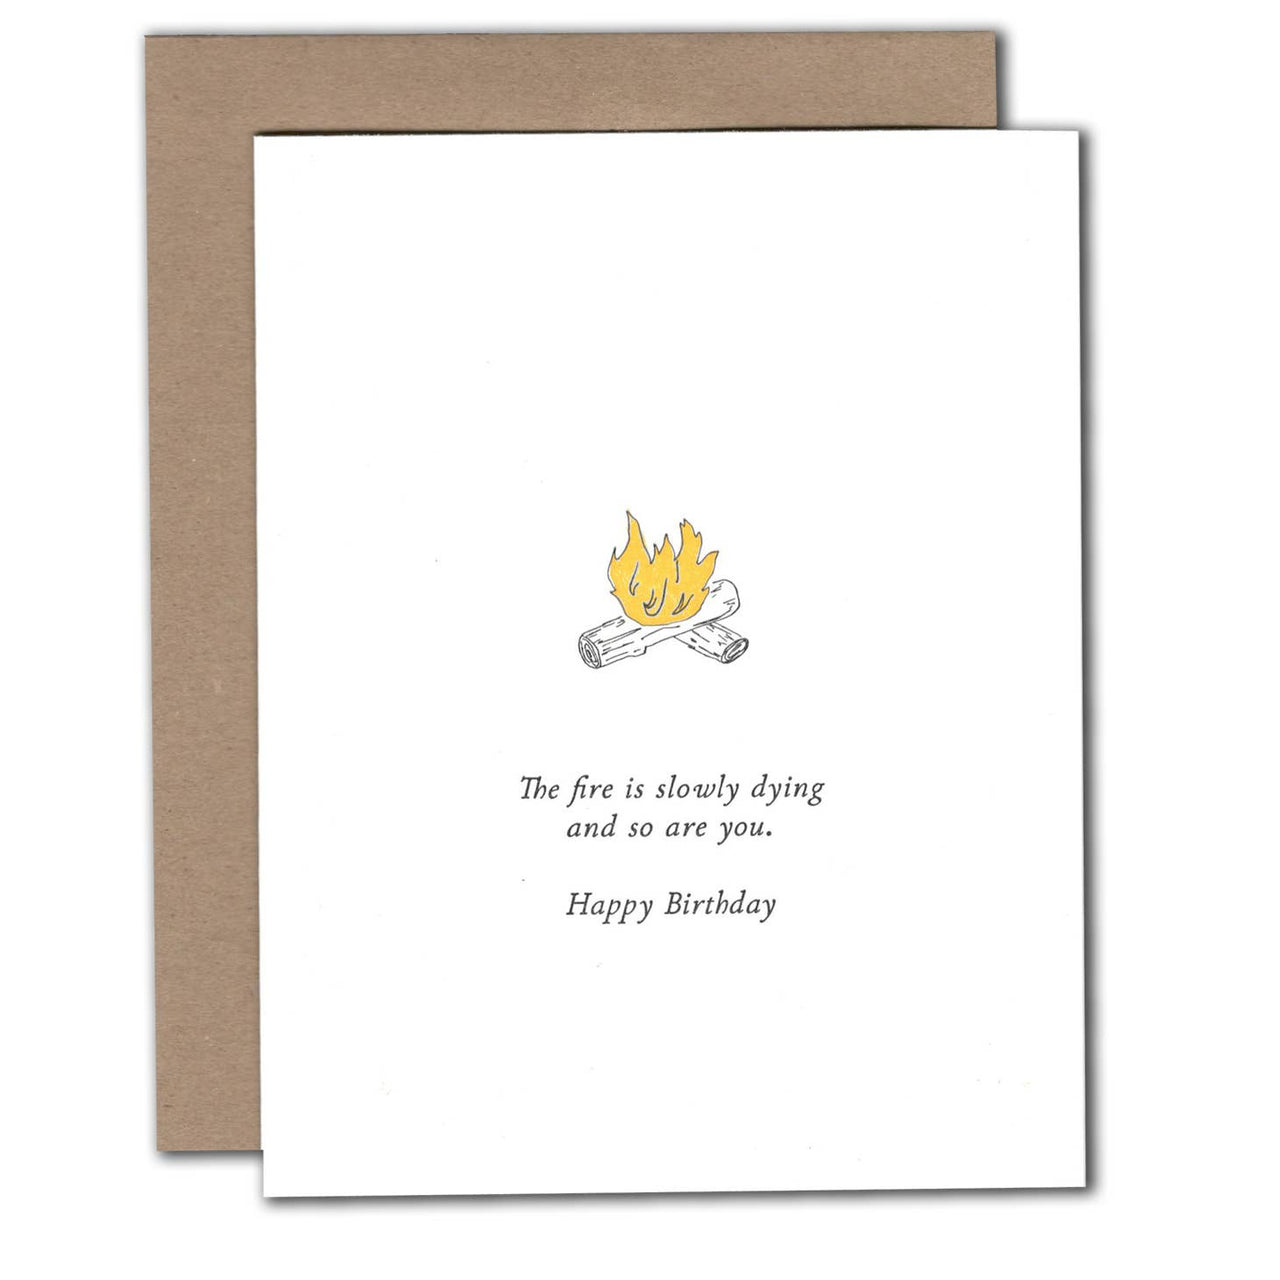 Power & Light Press - Greeting Card - The fire is slowly dying and so are you, Happy Birthday